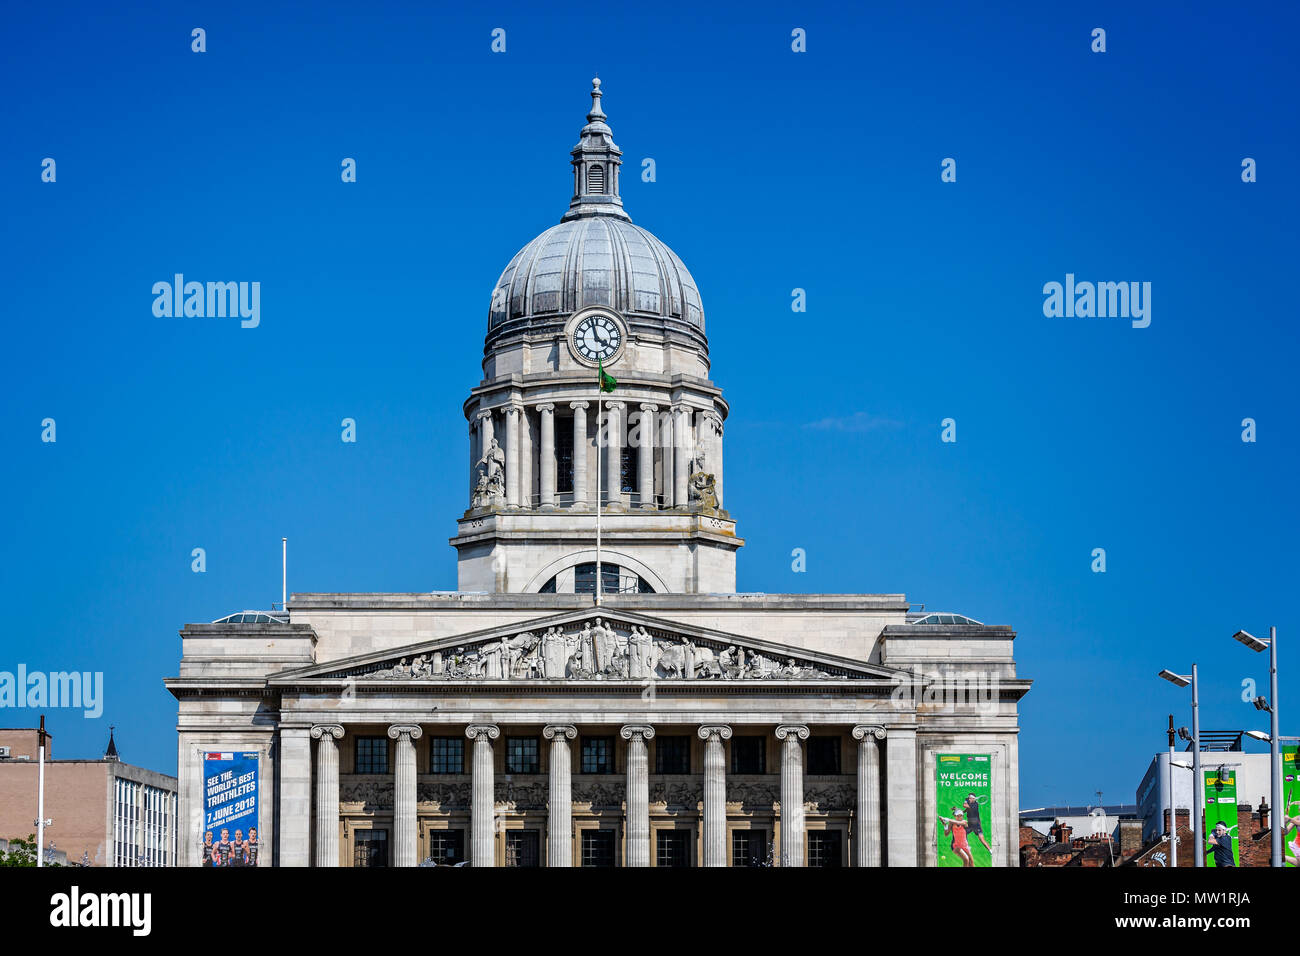 Nottingham Council House from the Old Market Square taken in Nottingham, Nottinghamshire, UK on 24 May 2018 Stock Photo